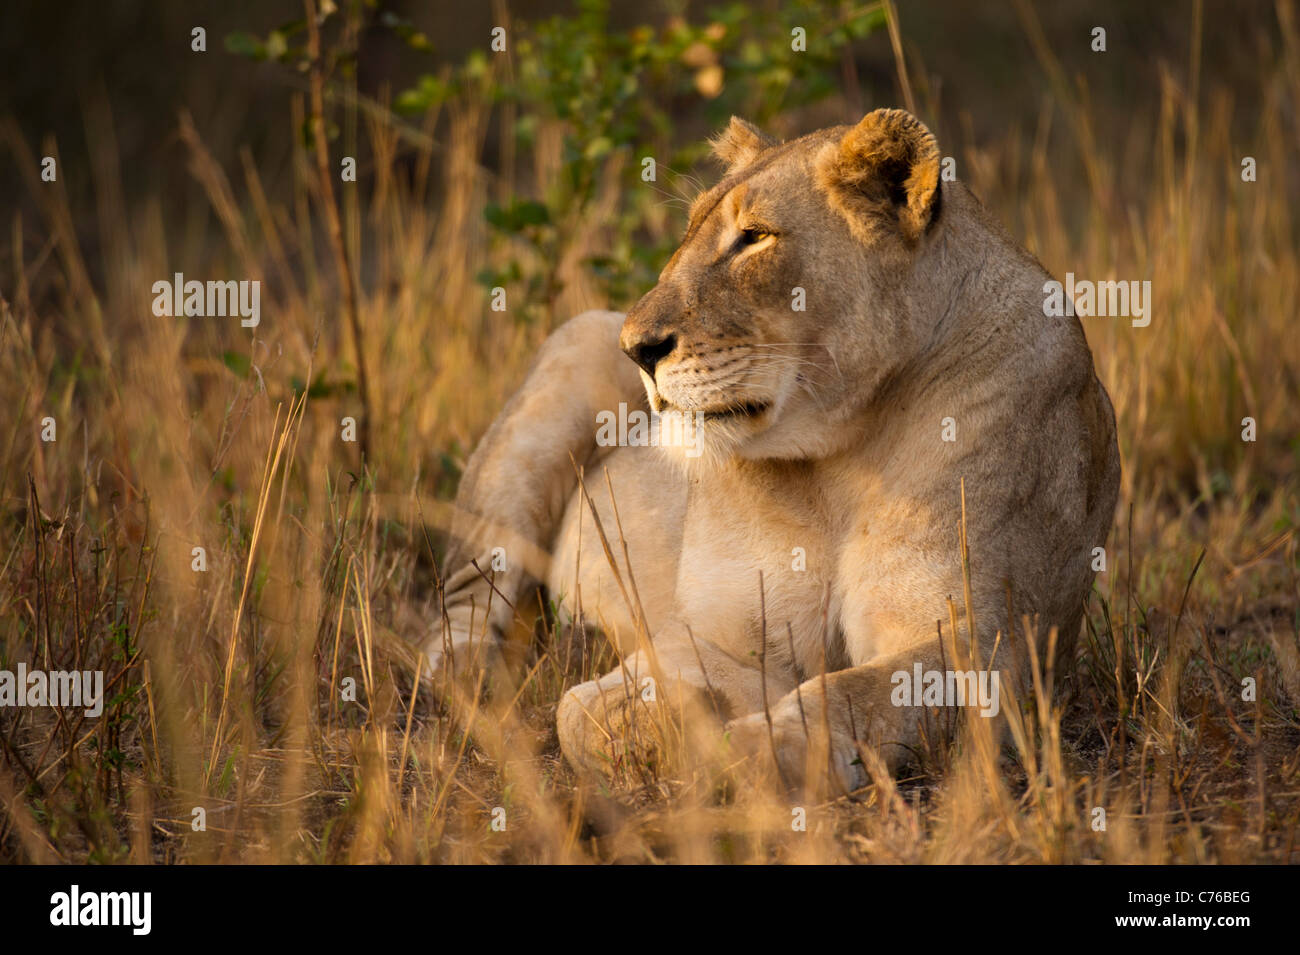 Lion (Panthero leo), Phinda Game Reserve, Sud Africa Foto Stock